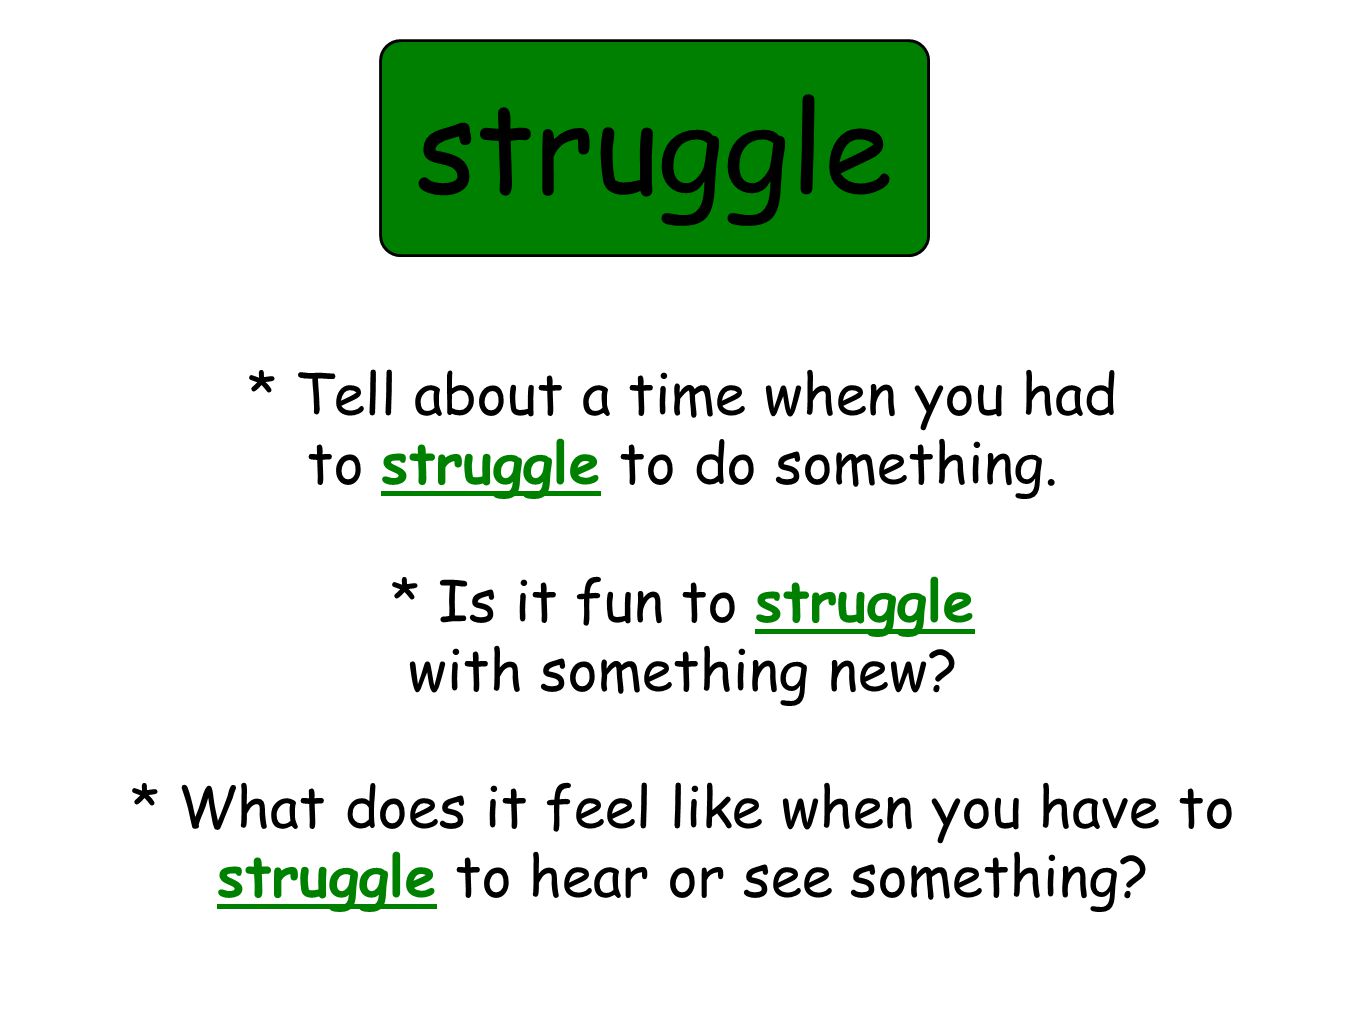 * Tell about a time when you had to struggle to do something.